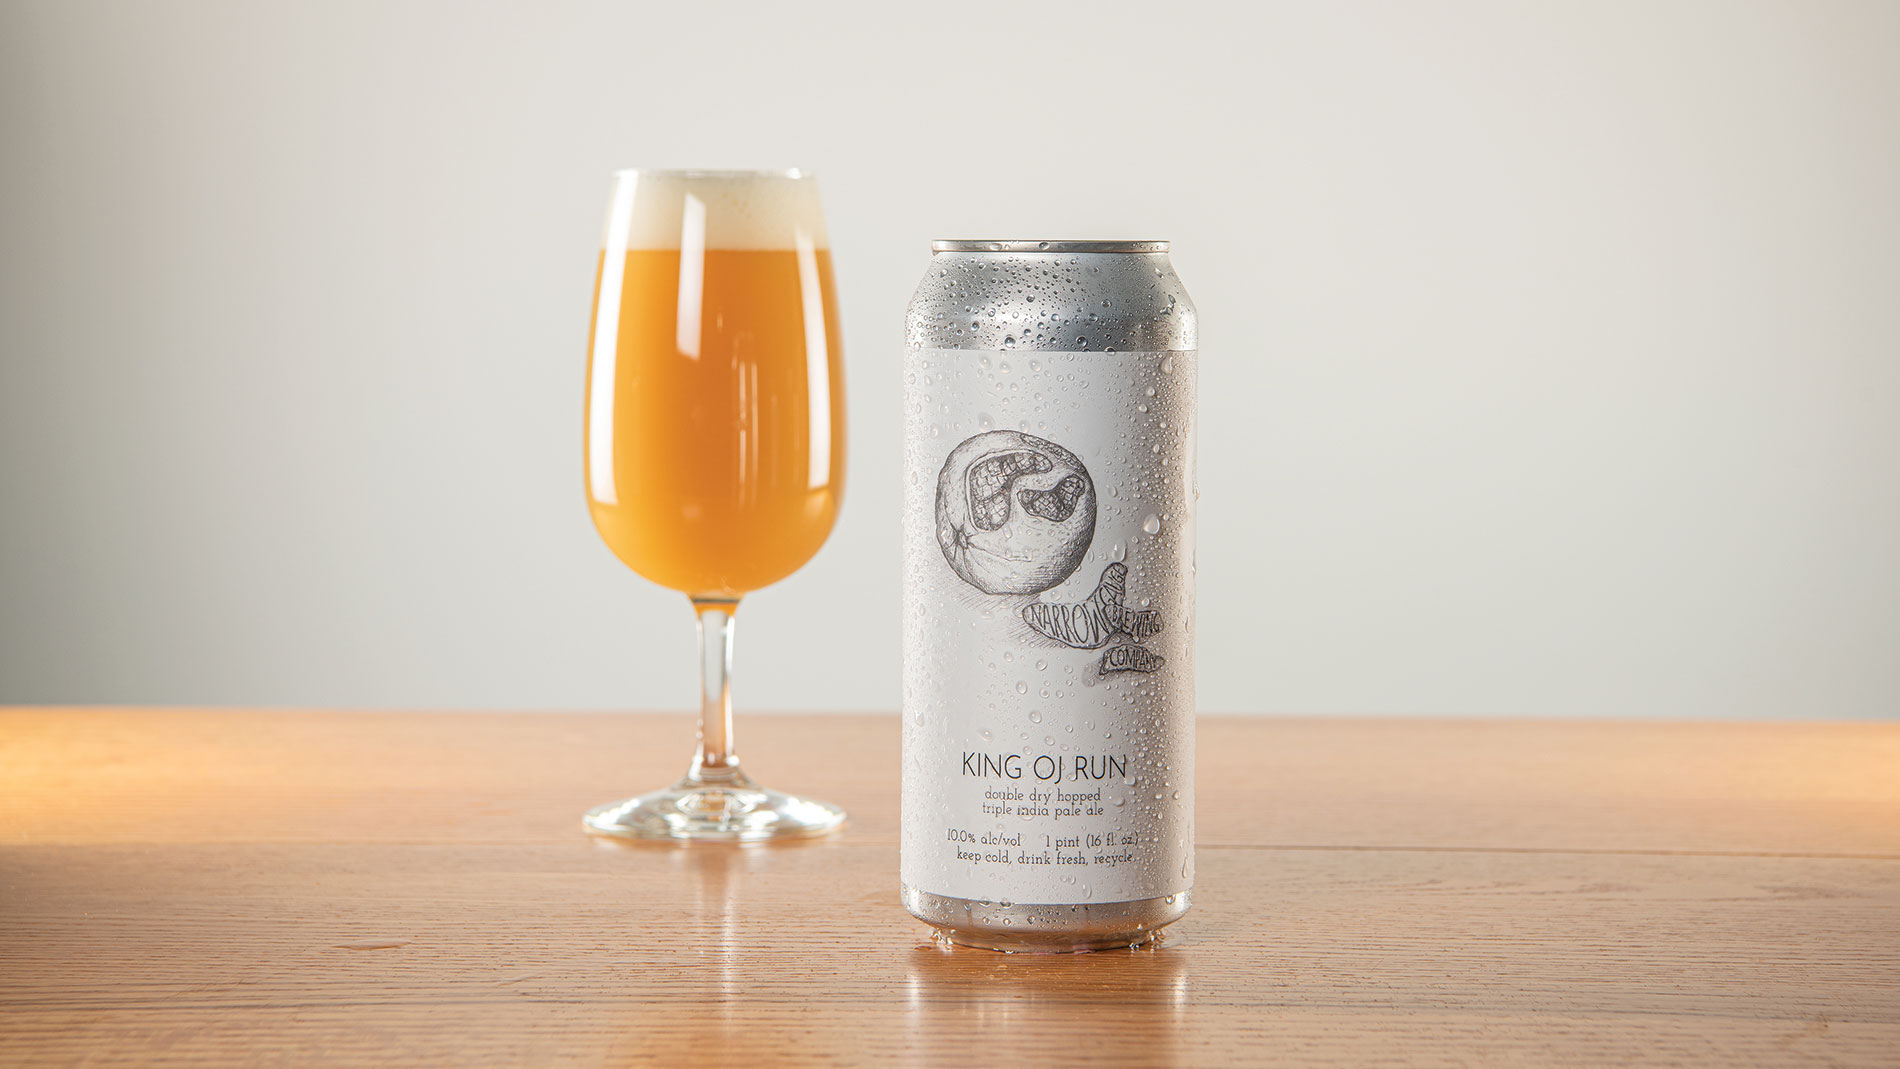 Drink this double dry-hopped triple IPA from Narrow Gauge Brewing Co.